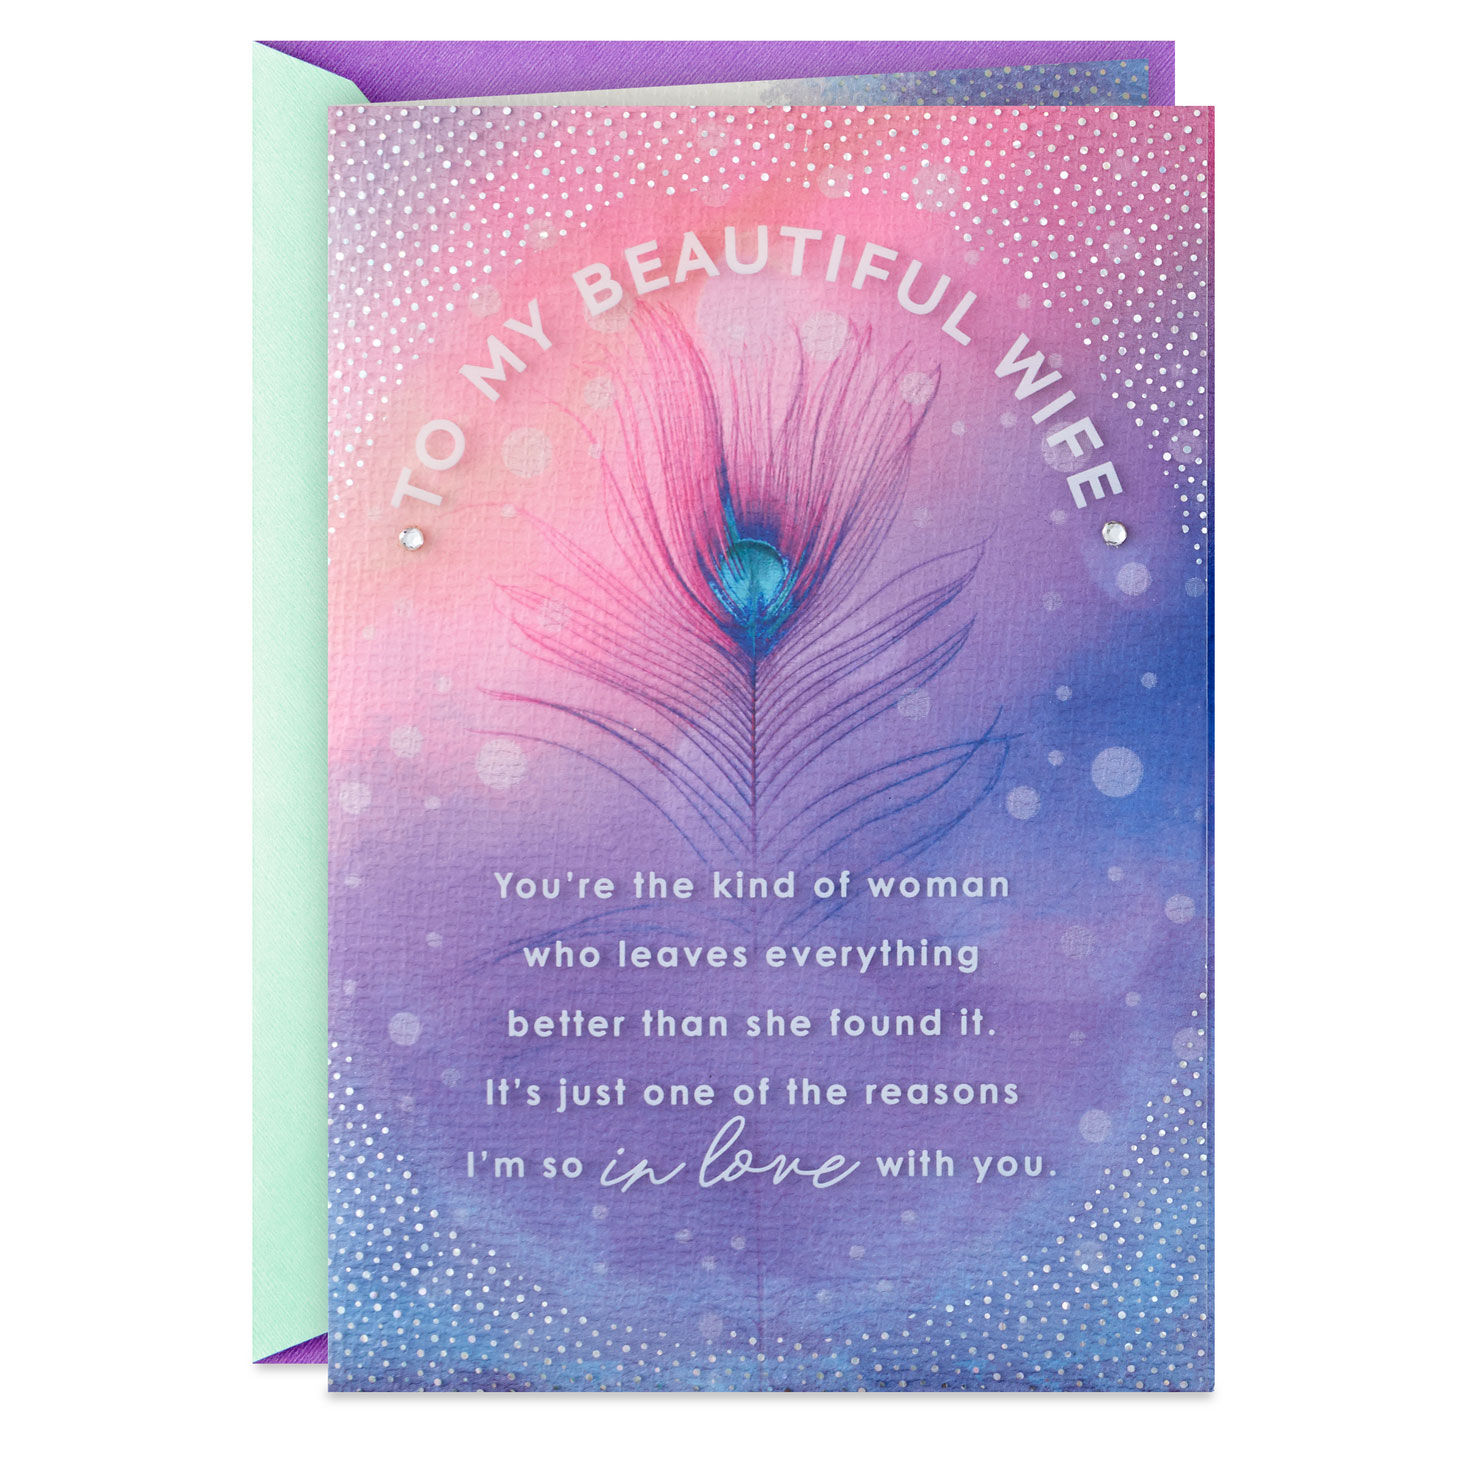 The Best Thing in My World Birthday Card for Wife for only USD 7.59 | Hallmark